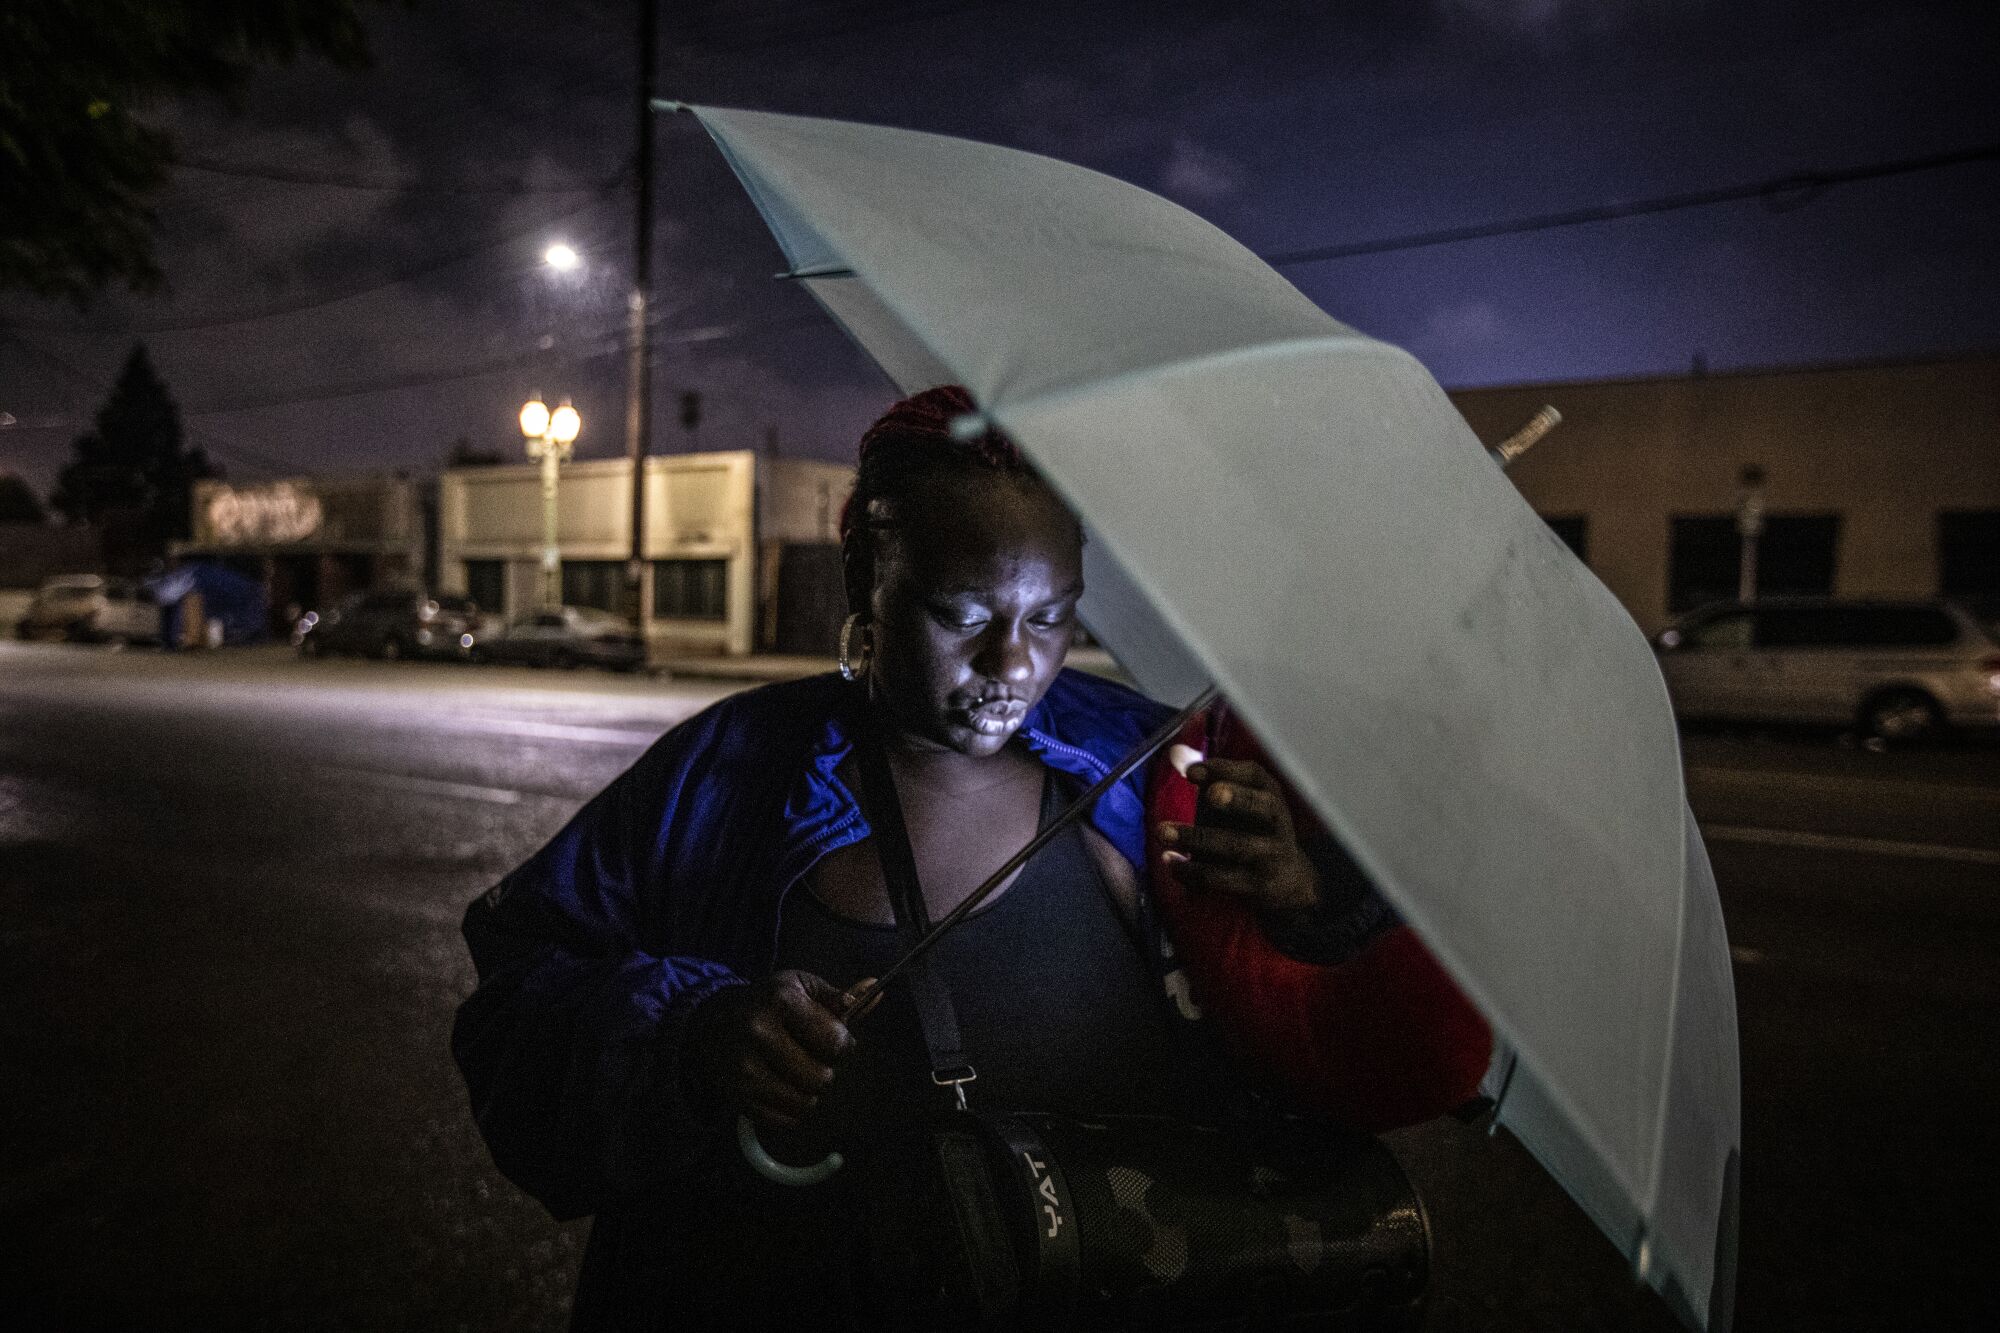 A woman holds an umbrella as a cell phone illuminates her face